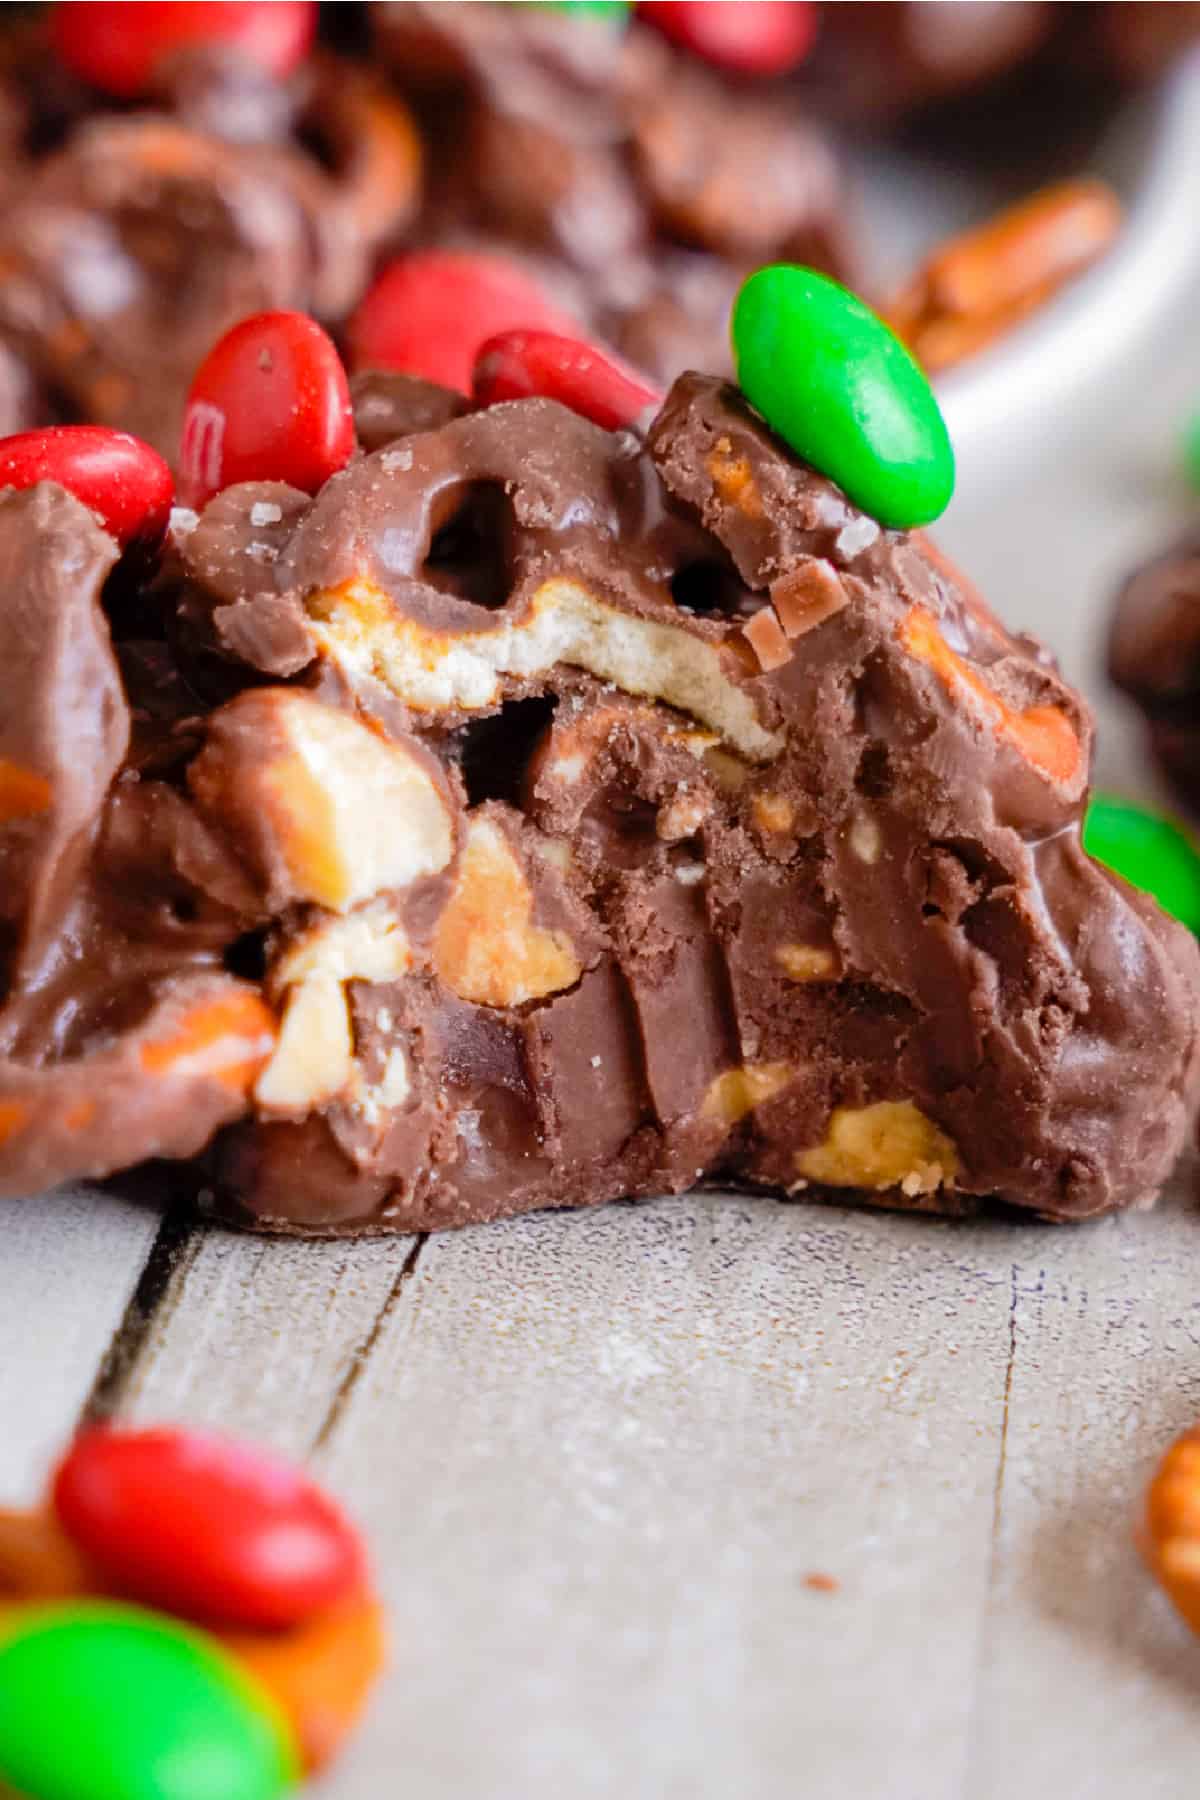 Chocolate crockpot candy missing a bite close up to see the pretzels inside with red and green M&Ms on top.